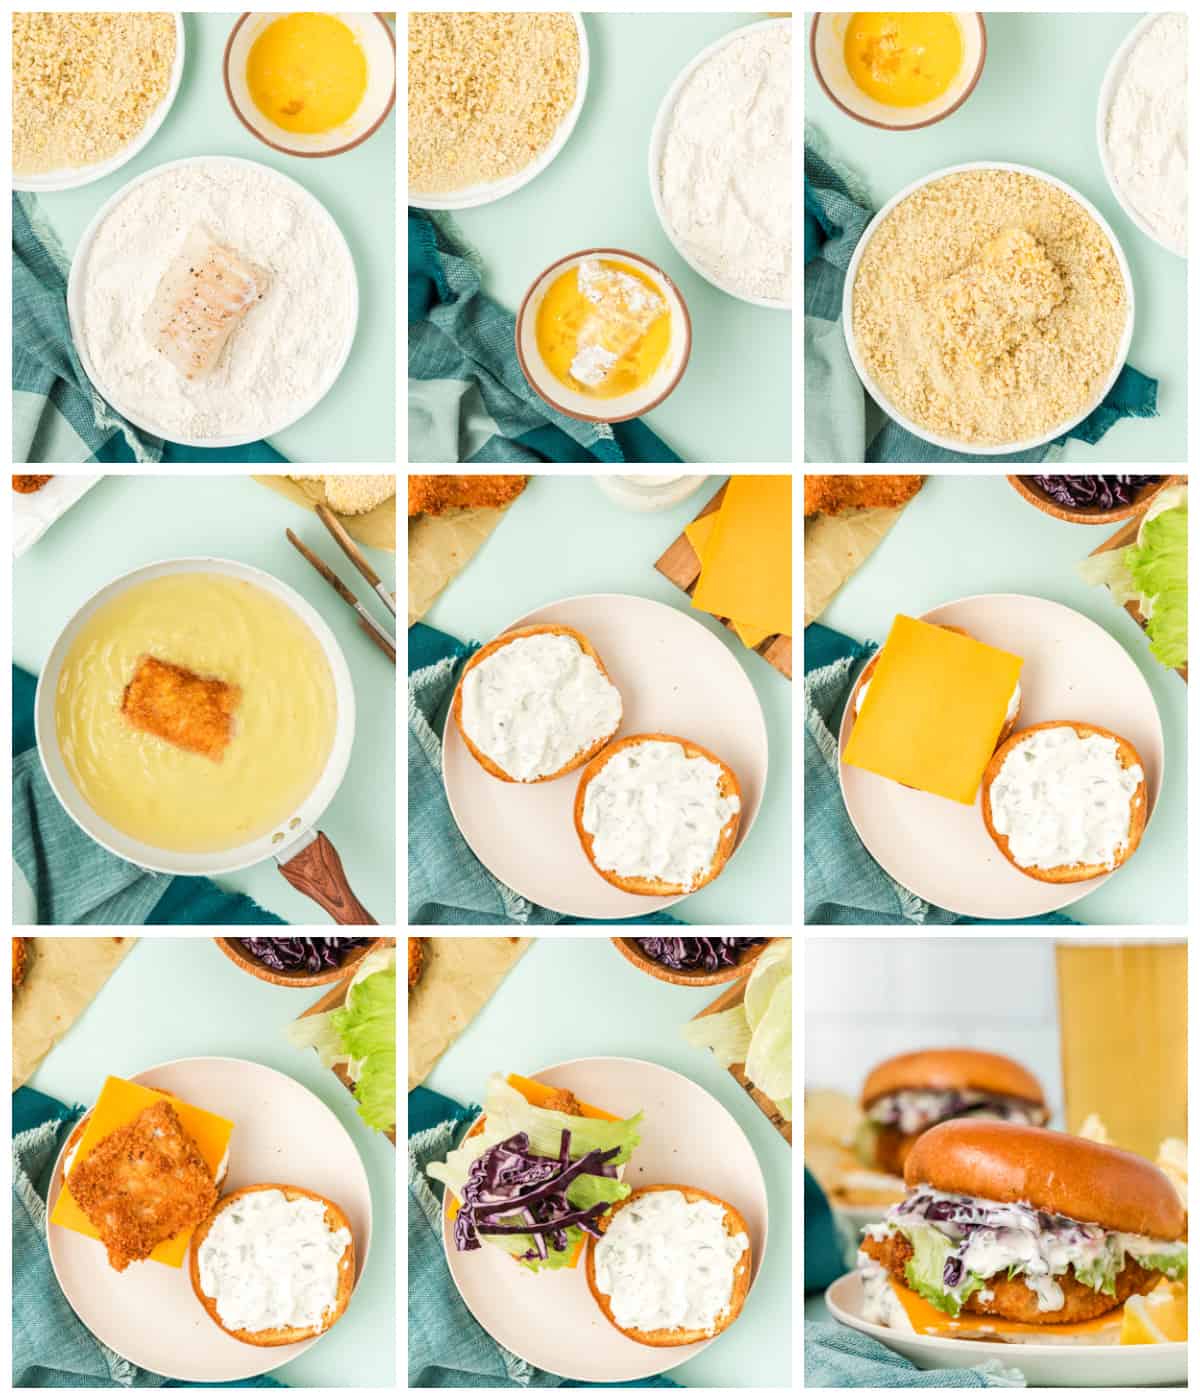 Step by step photos on how to make a Crispy Fish Sandwich.